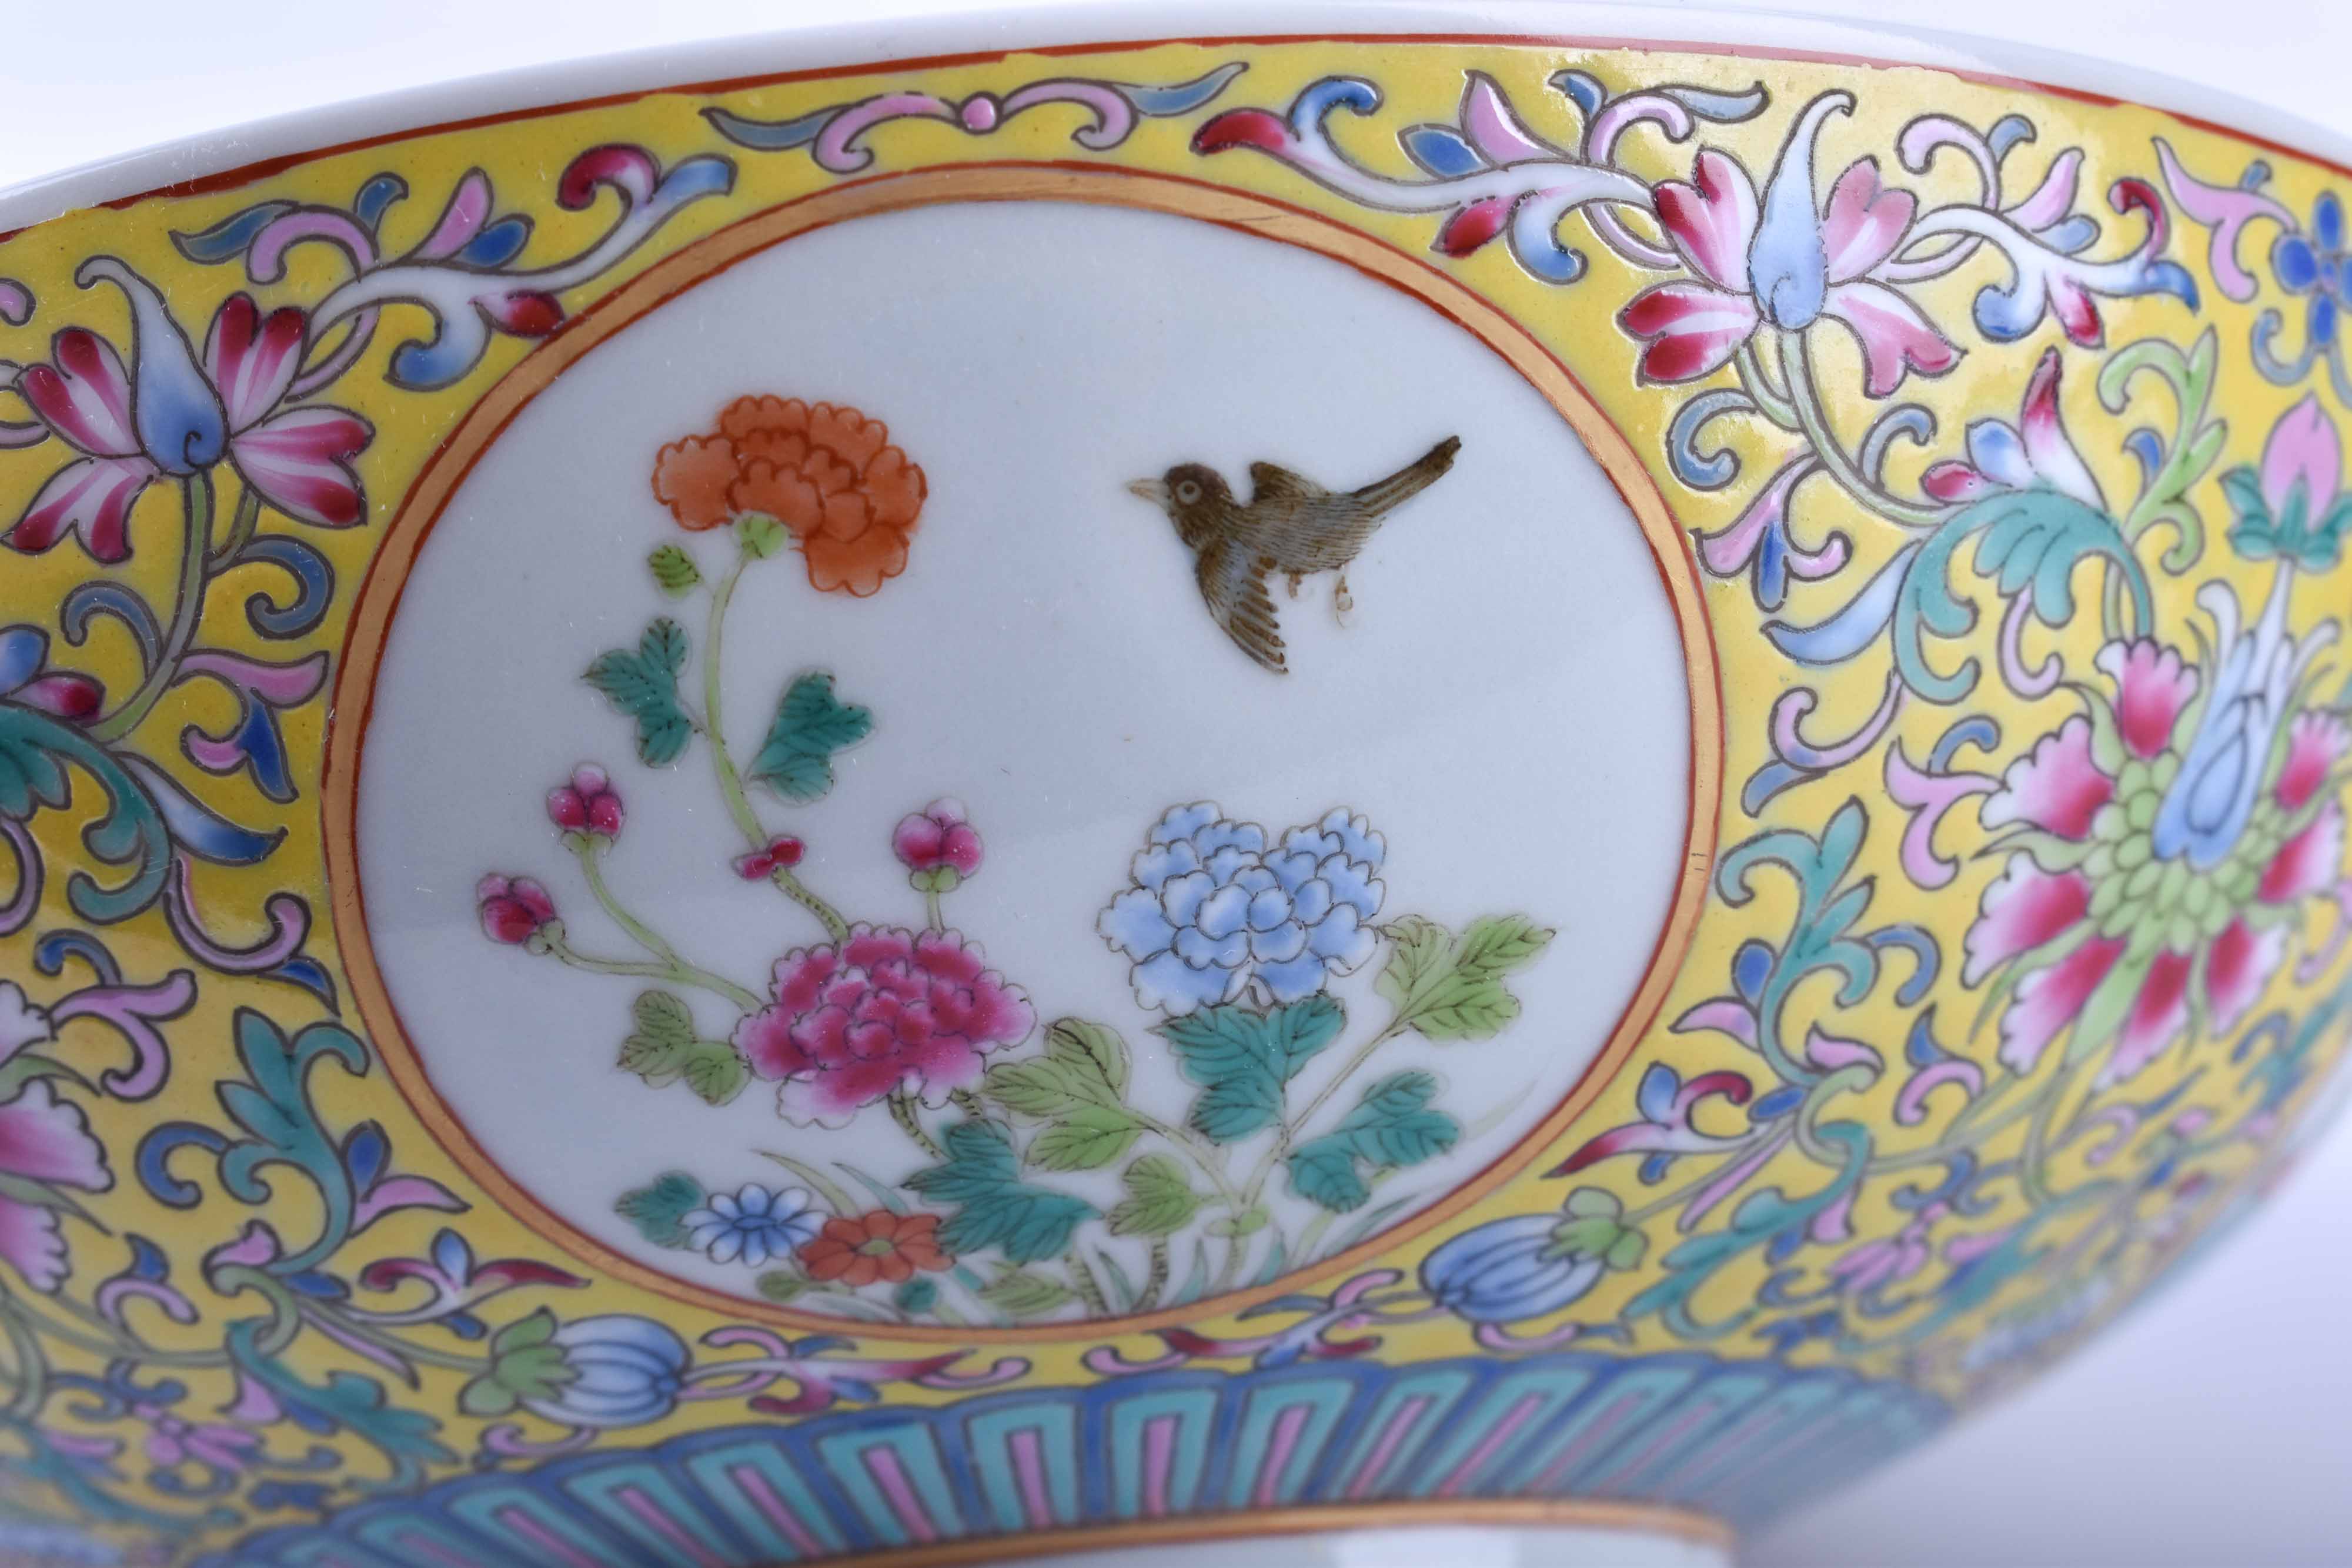  Famille rose bowl late Qing dynasty - Image 6 of 12